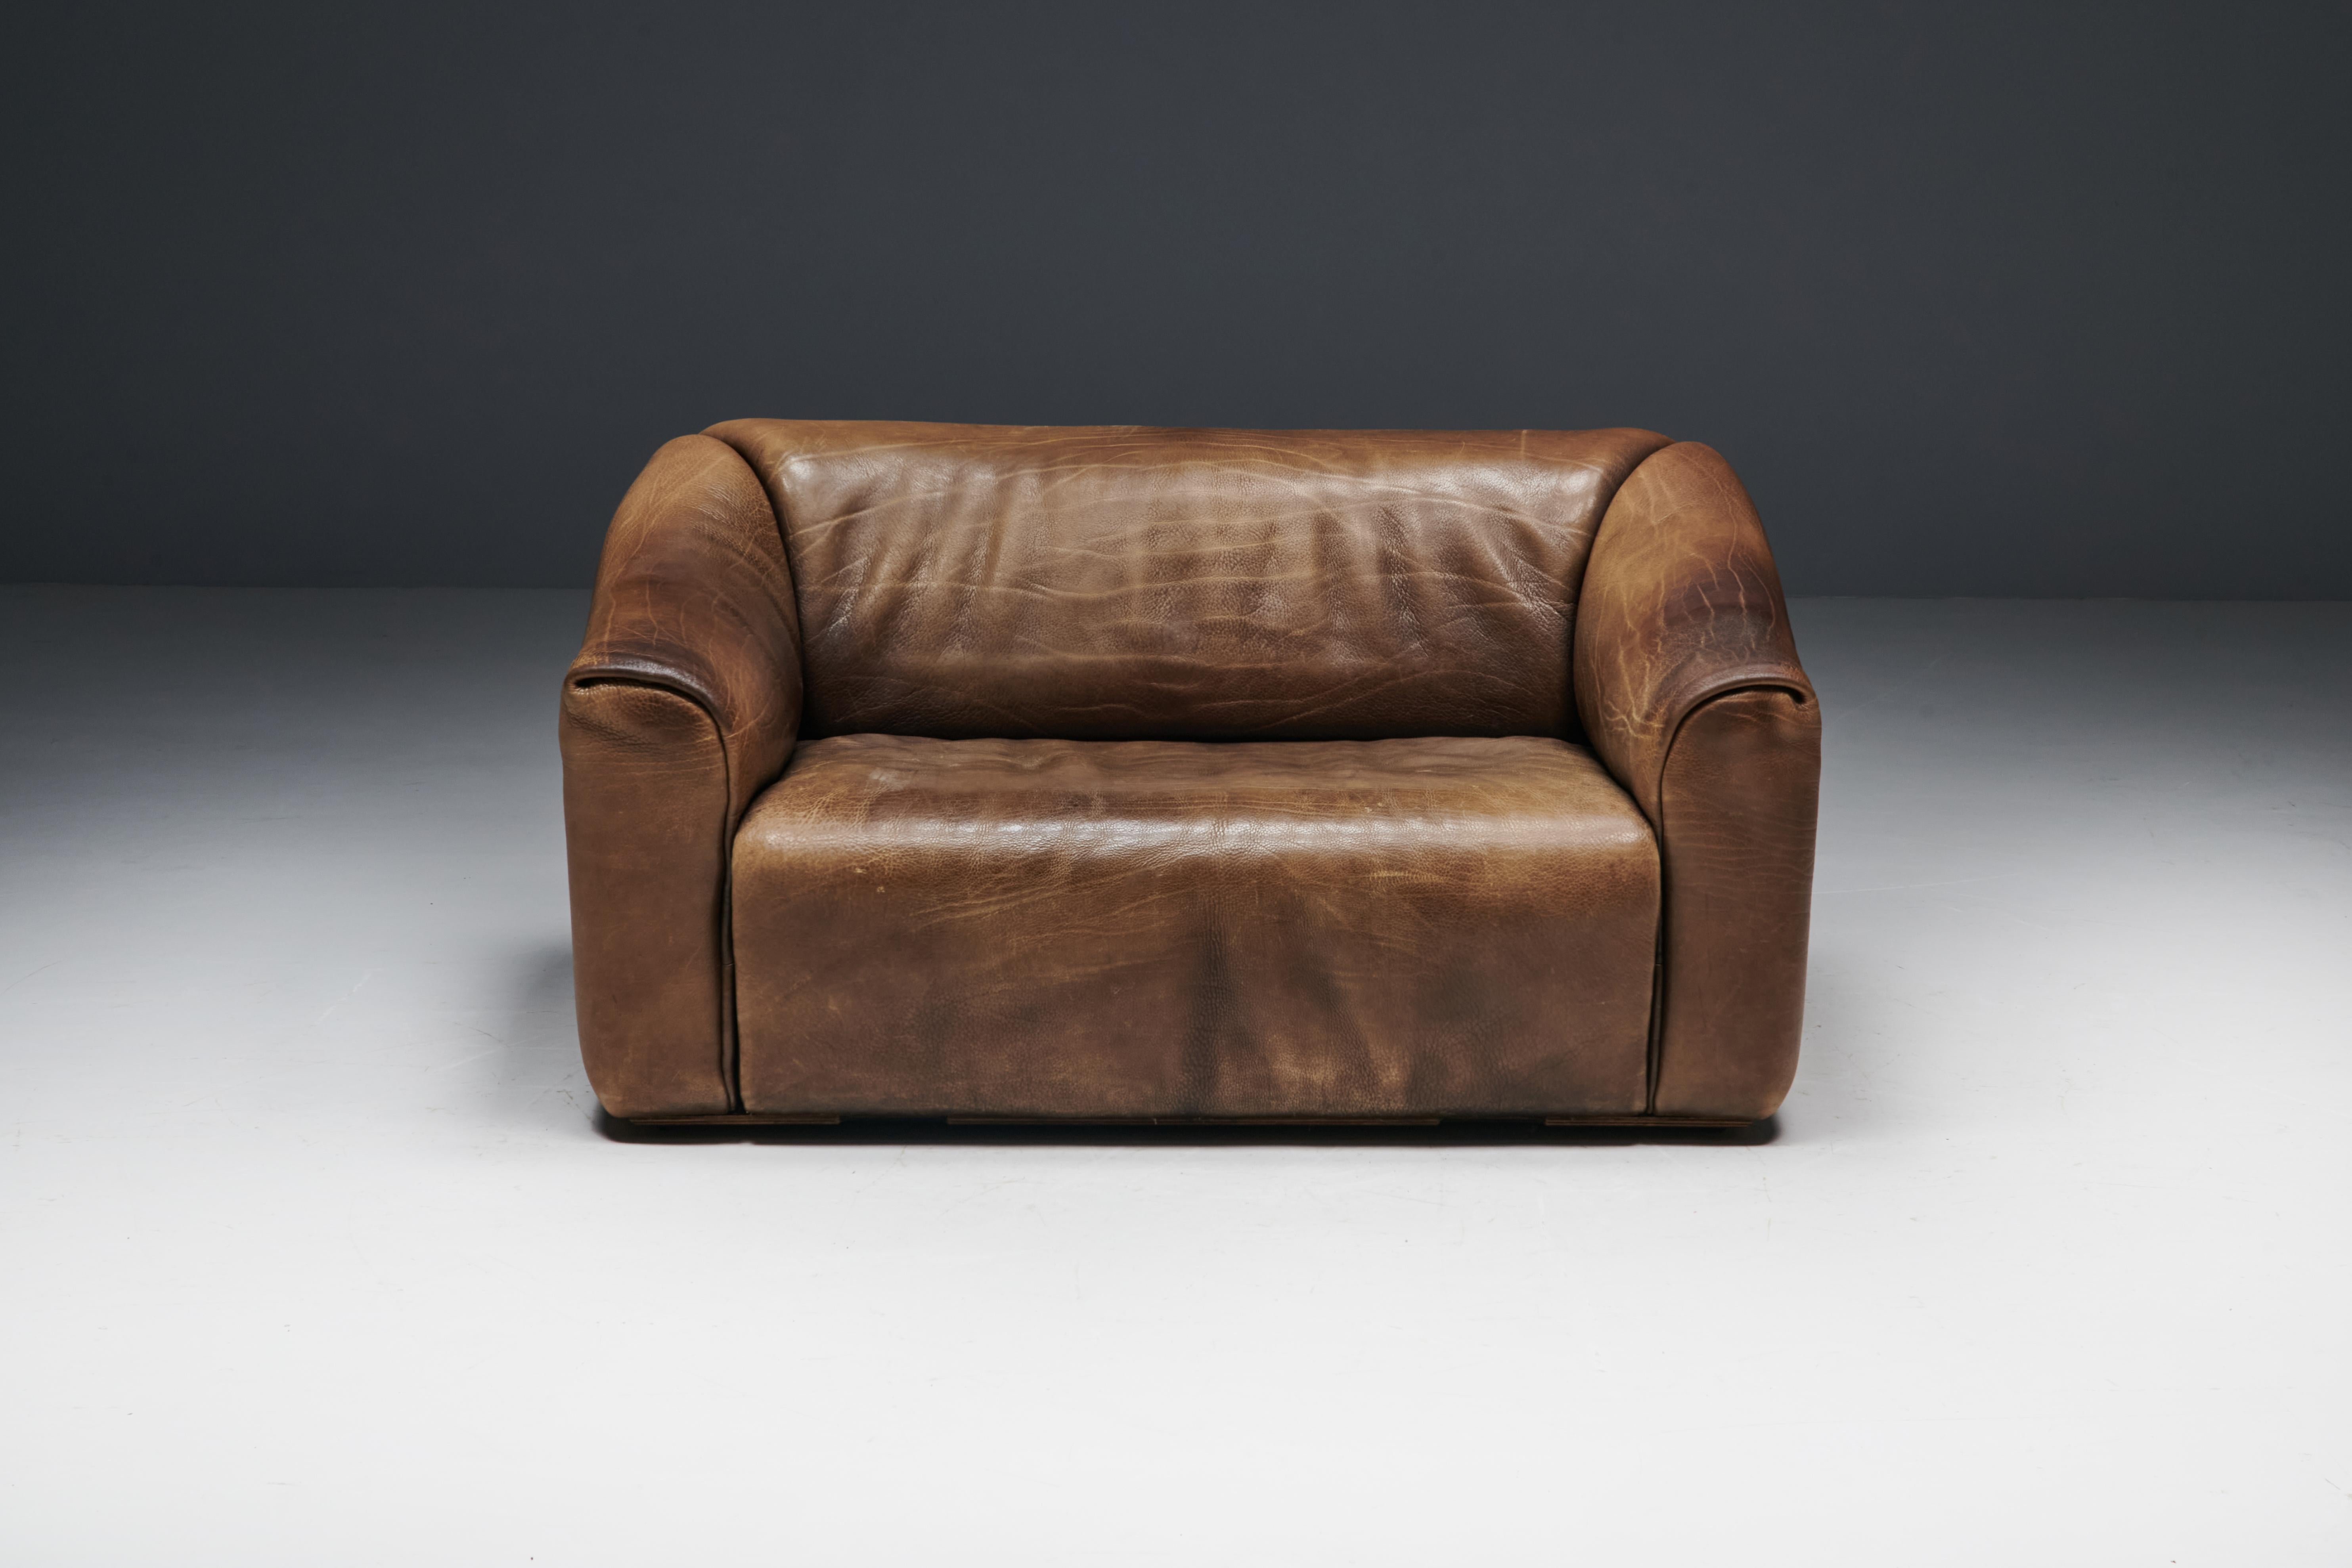 DS47 two-seater sofa, a masterpiece crafted by De Sede in Switzerland in 1970. Immerse yourself in luxury with its high-quality brown buffalo leather, showcasing the renowned craftsmanship and comfort seating for which De Sede is celebrated. The